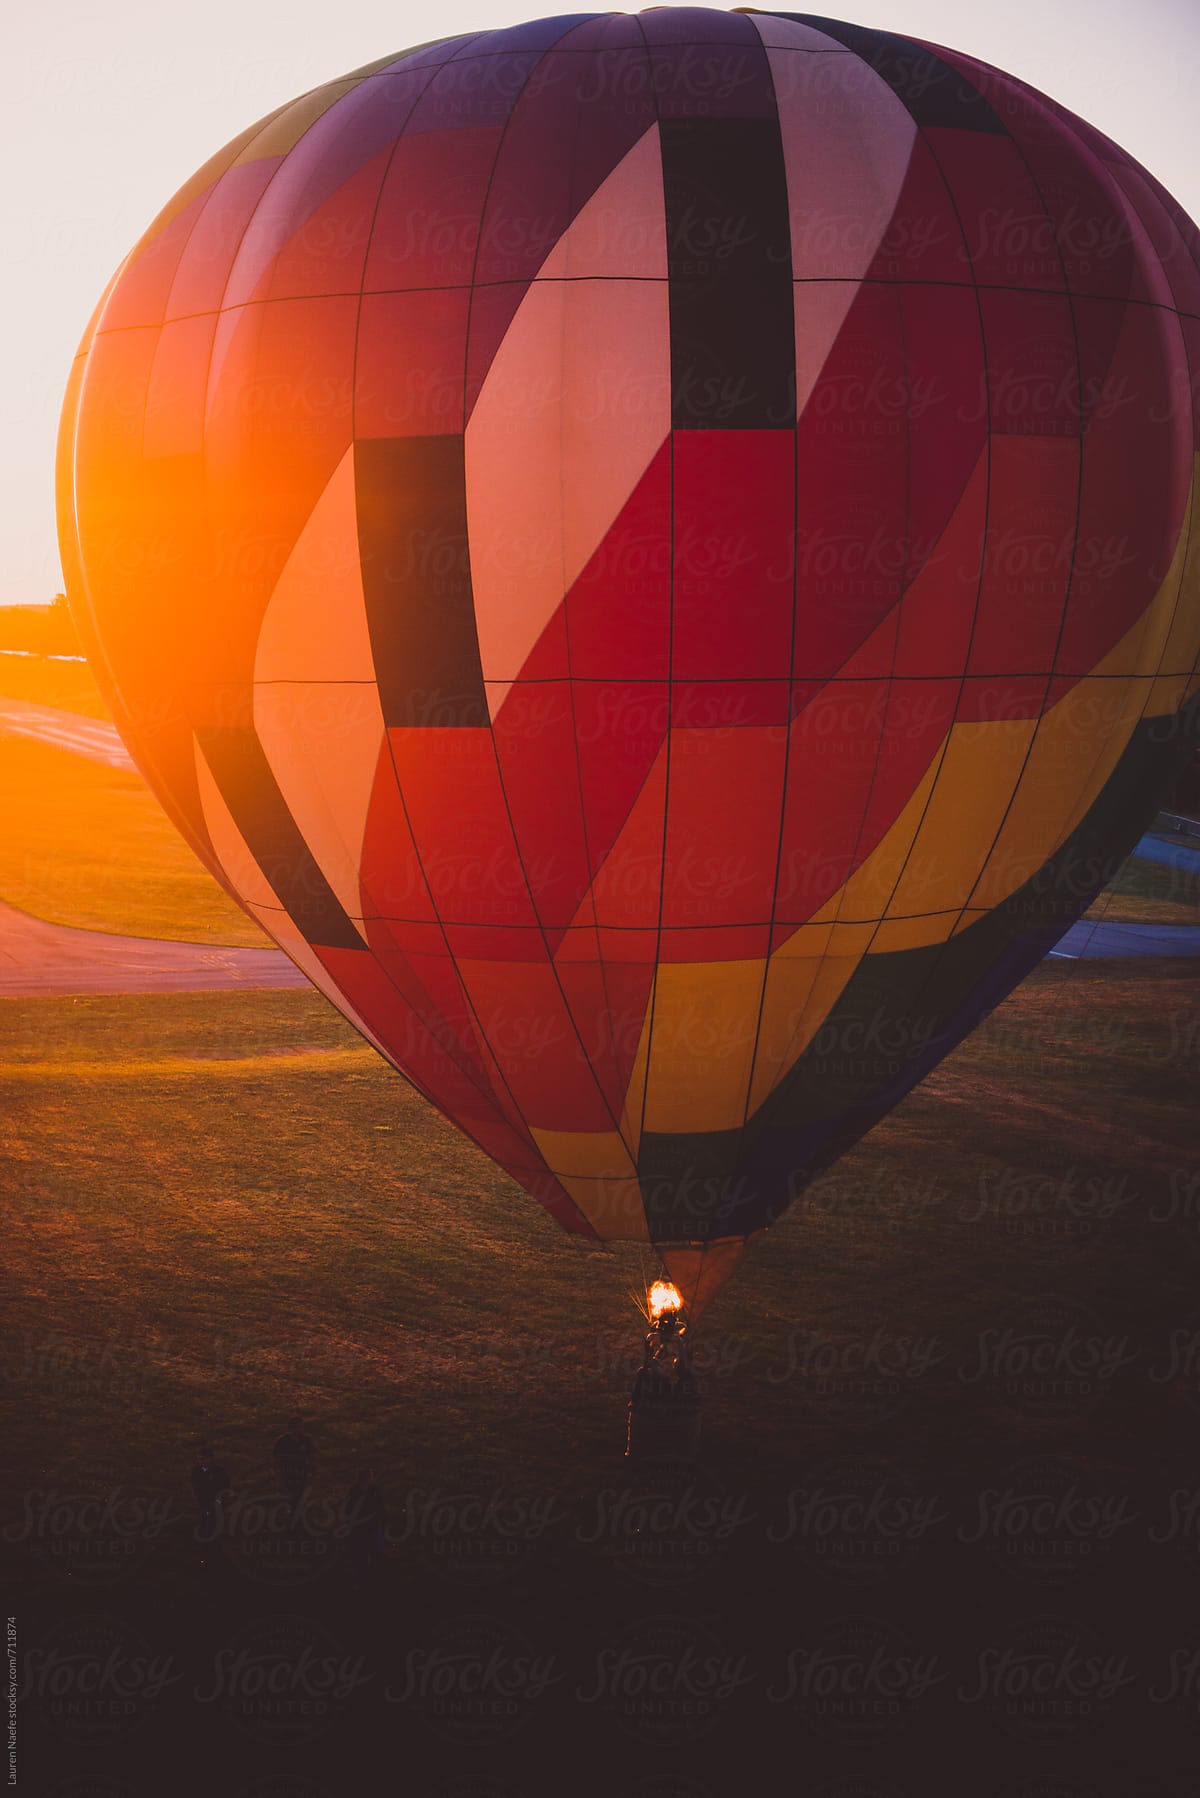 View of hot air balloon taking off